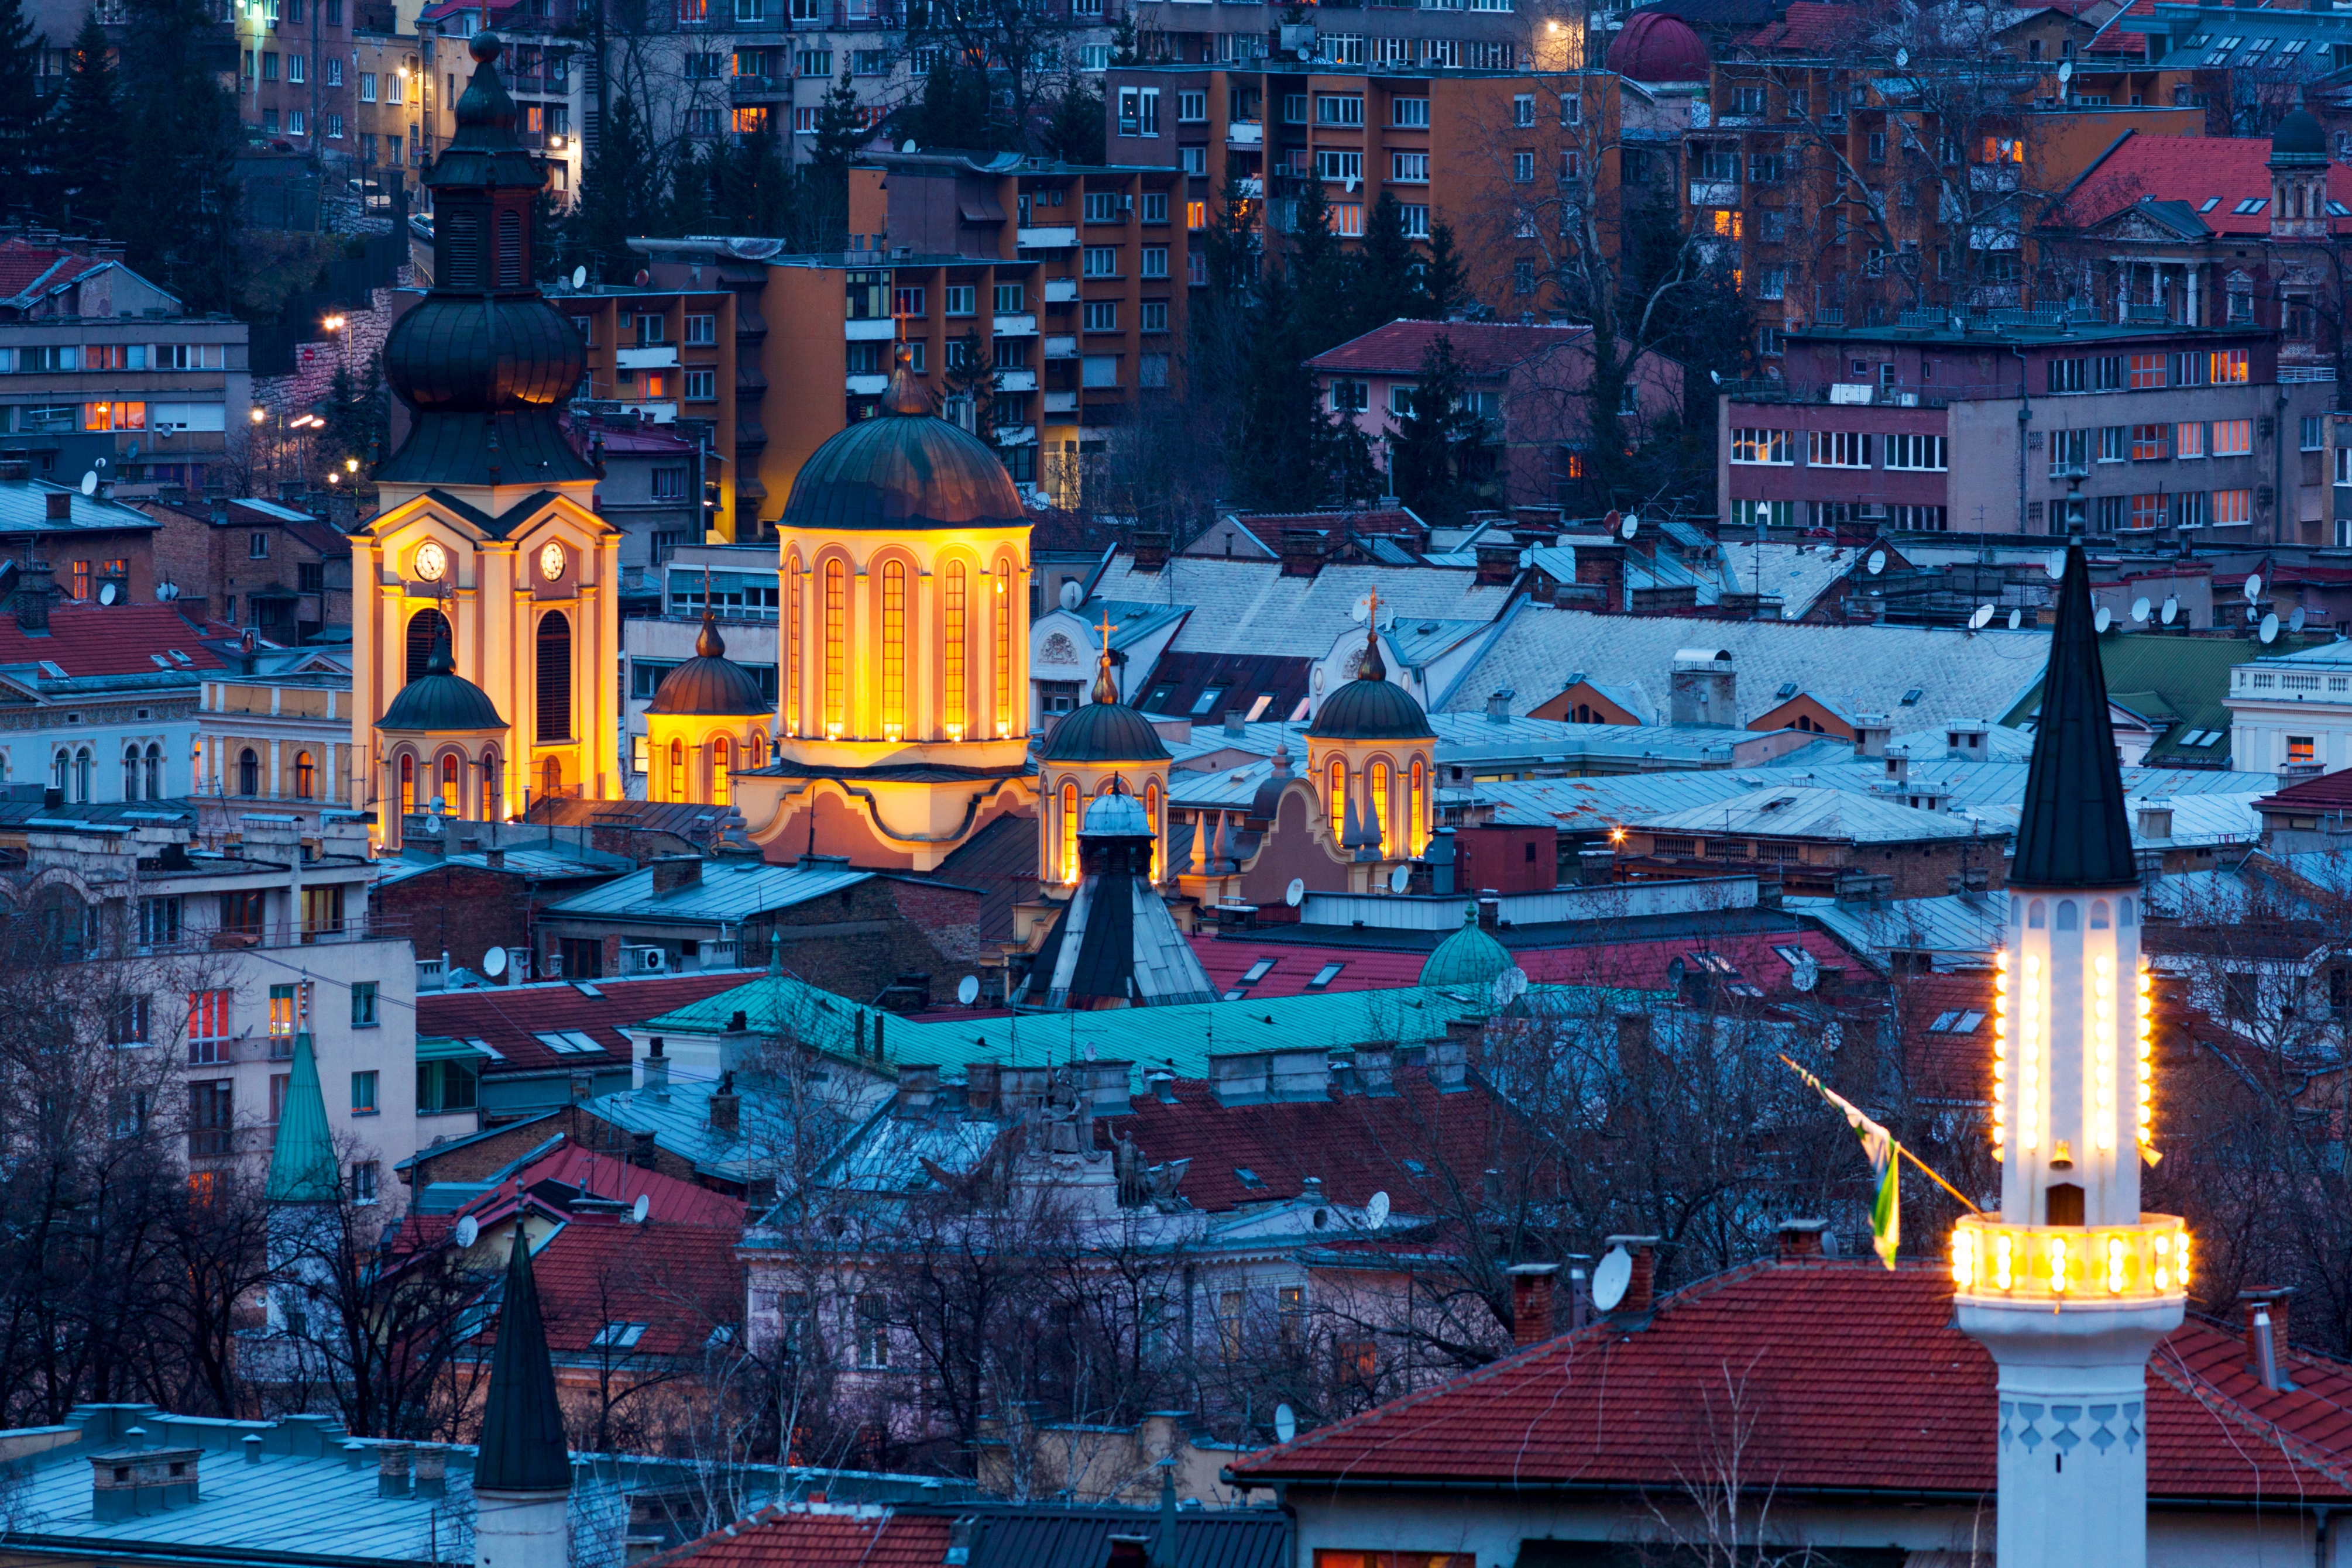 Within two hundred meter radius in downtown Sarajevo one can visit Catholic and Orthodox Cathedrals, Mosques and Synagogues. (Photo: Shutterstock)